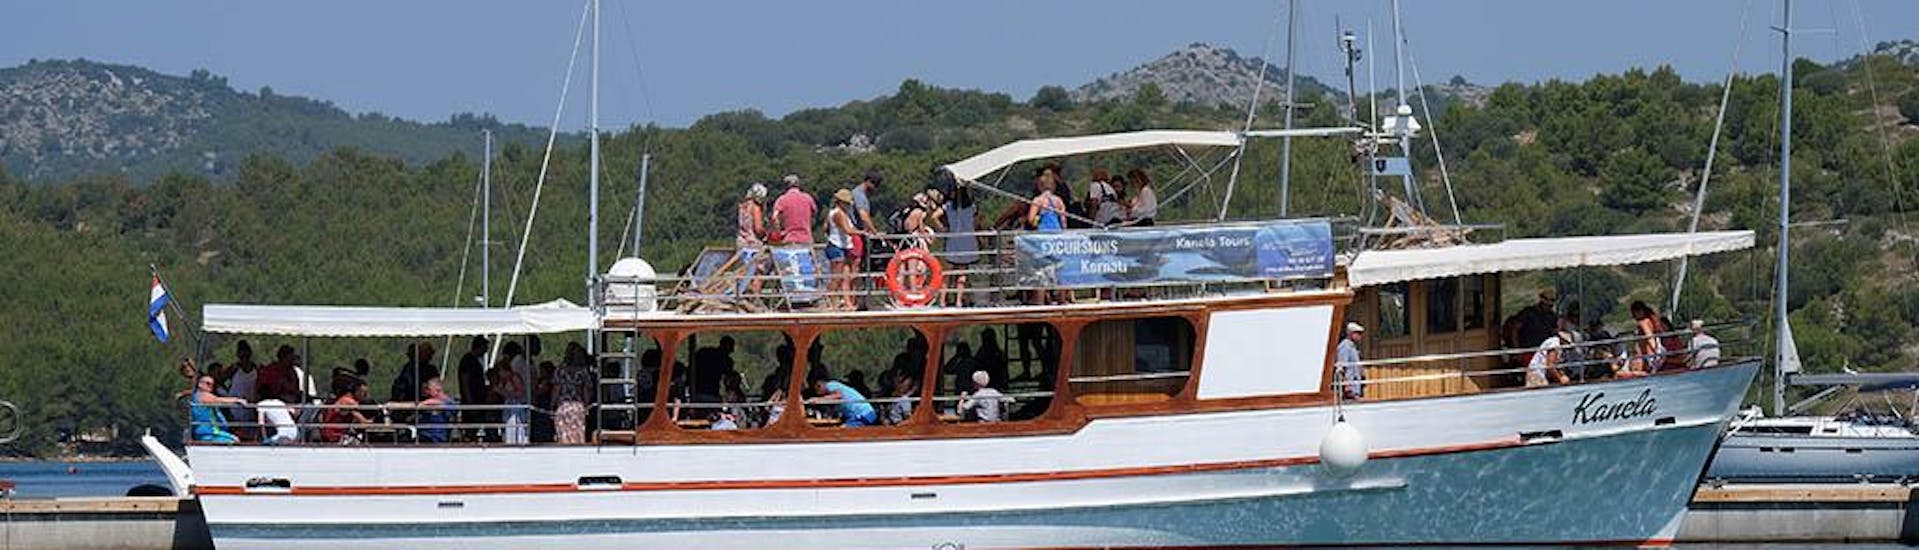 The boat of Maslina Tours Biograd during a tour.